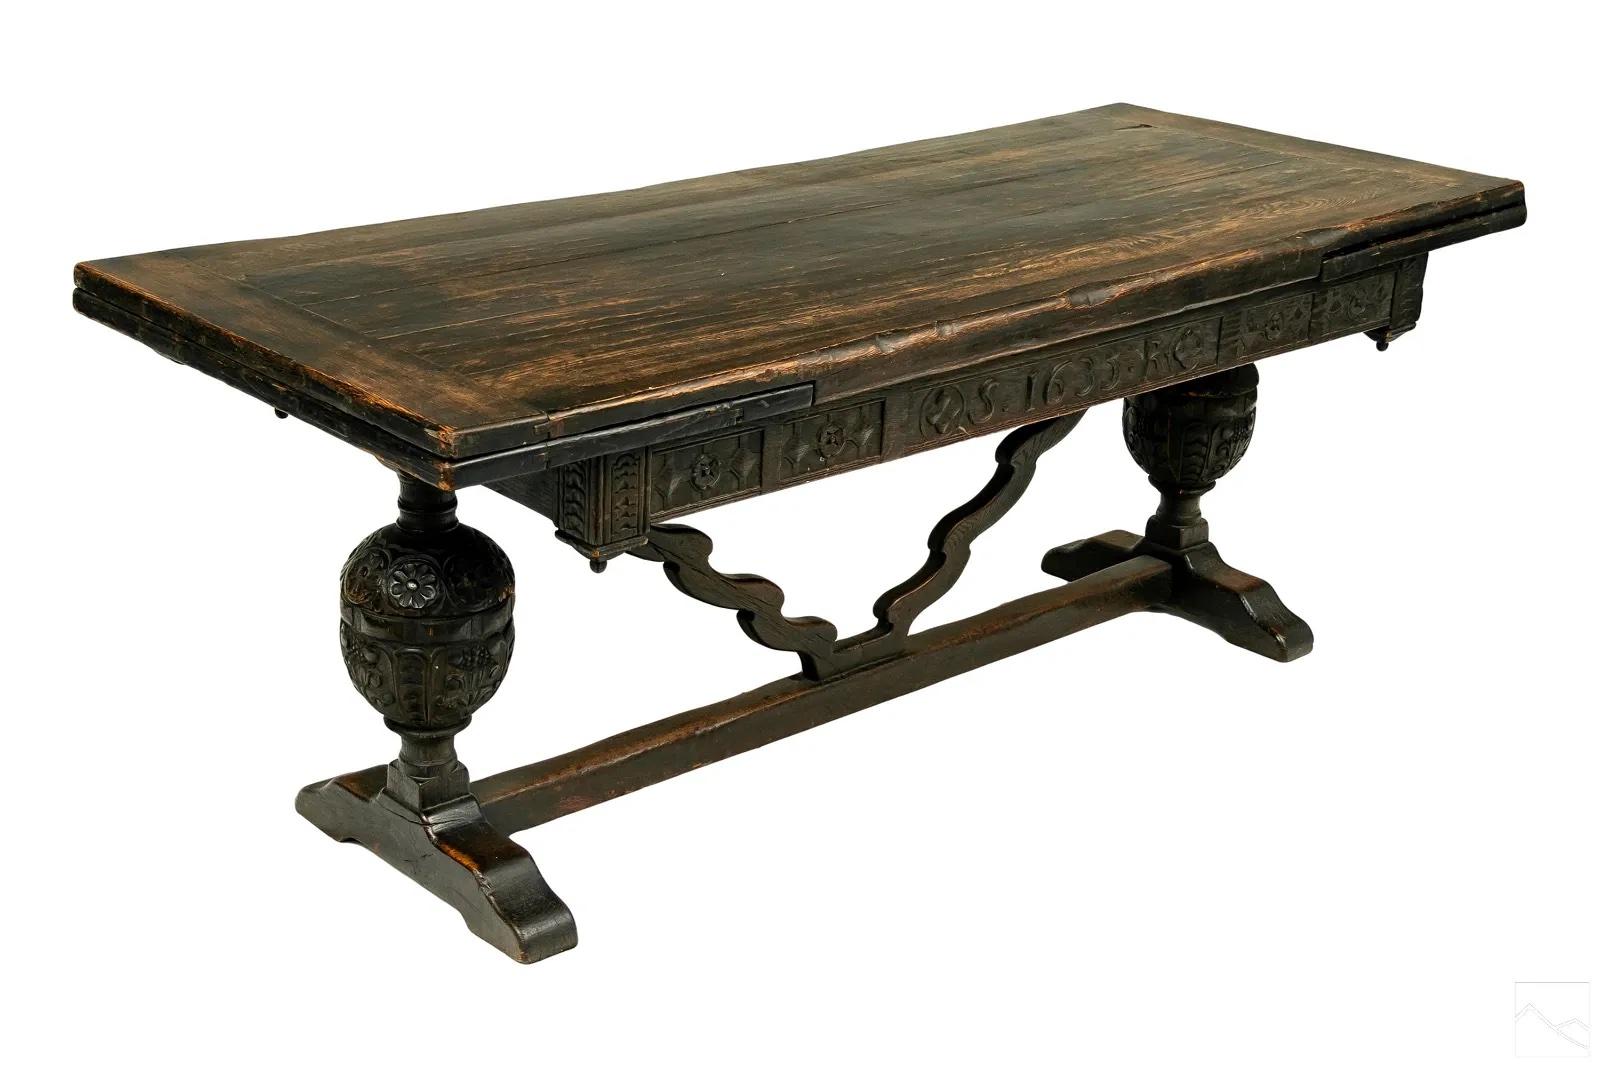 Carved Early 17th Century English Jacobean Refectory or Withdraw Table